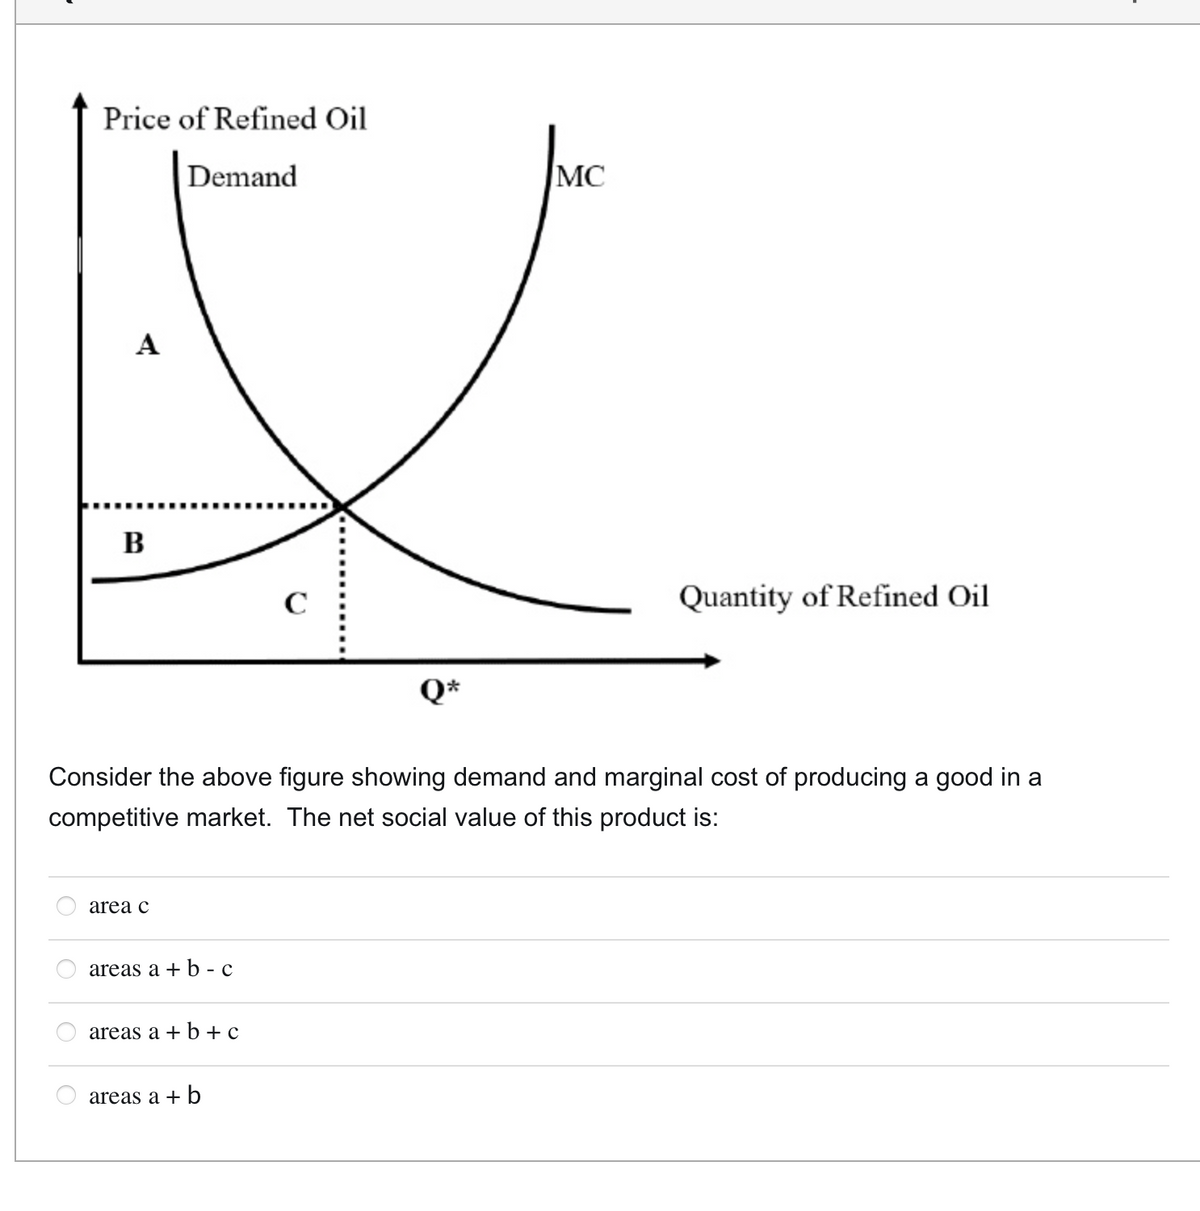 Price of Refined Oil
Demand
A
X
B
с
ööö
area c
Consider the above figure showing demand and marginal cost of producing a good in a
competitive market. The net social value of this product is:
areas a + b c
areas a + b + c
Q*
areas a + b
MC
Quantity of Refined Oil